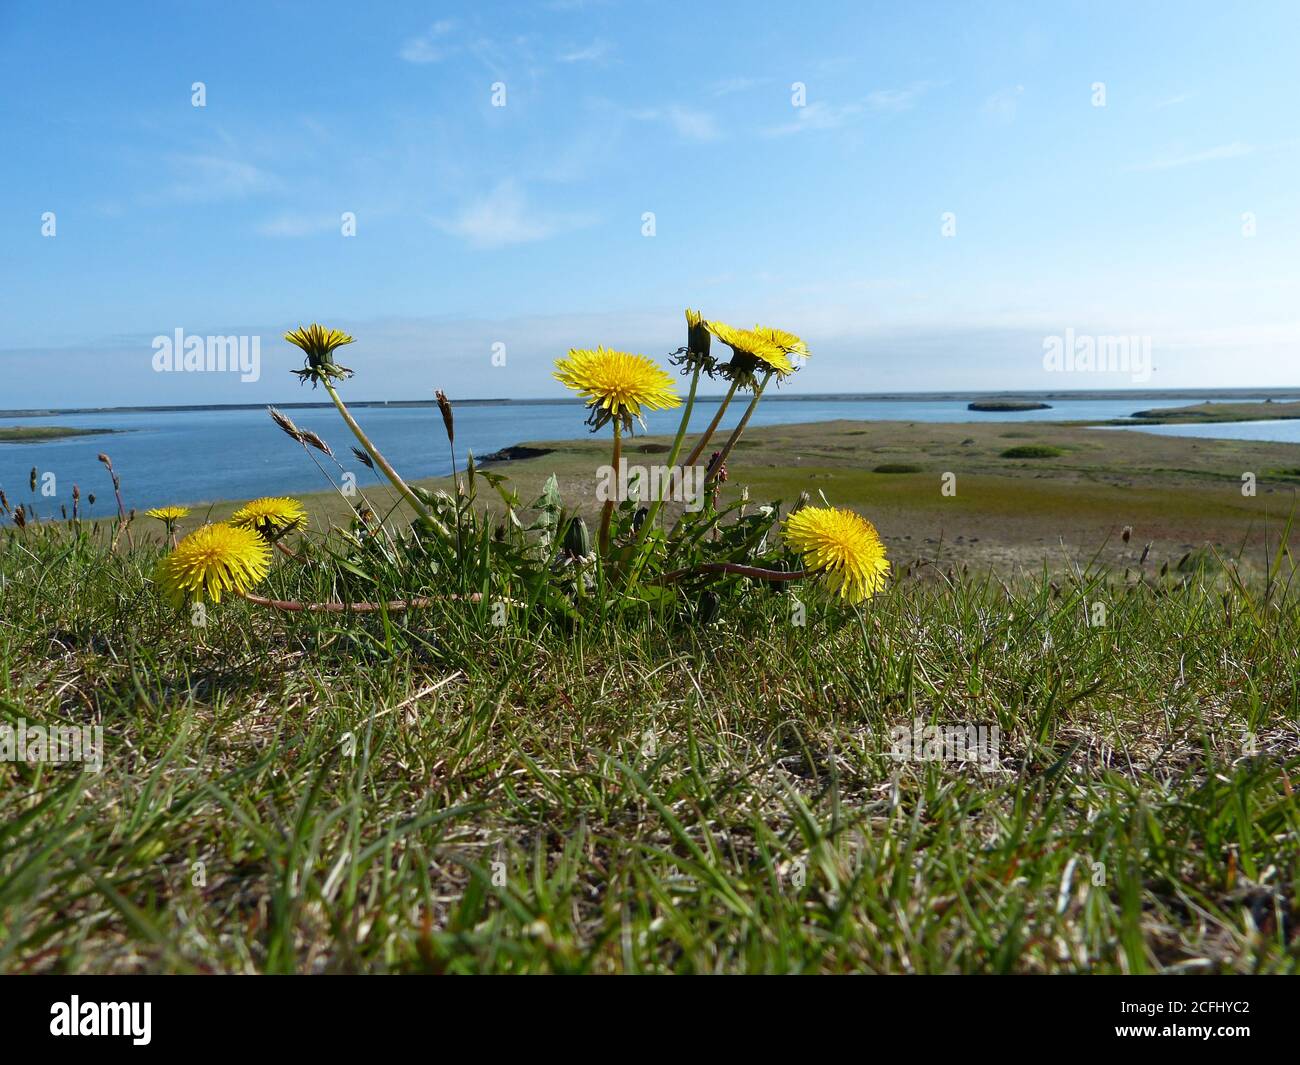 Natural beauty of Icelandic nature. Summer landscape in Iceland. Yellow flowers dandelions and green grass on the background of the blue sea. Stock Photo